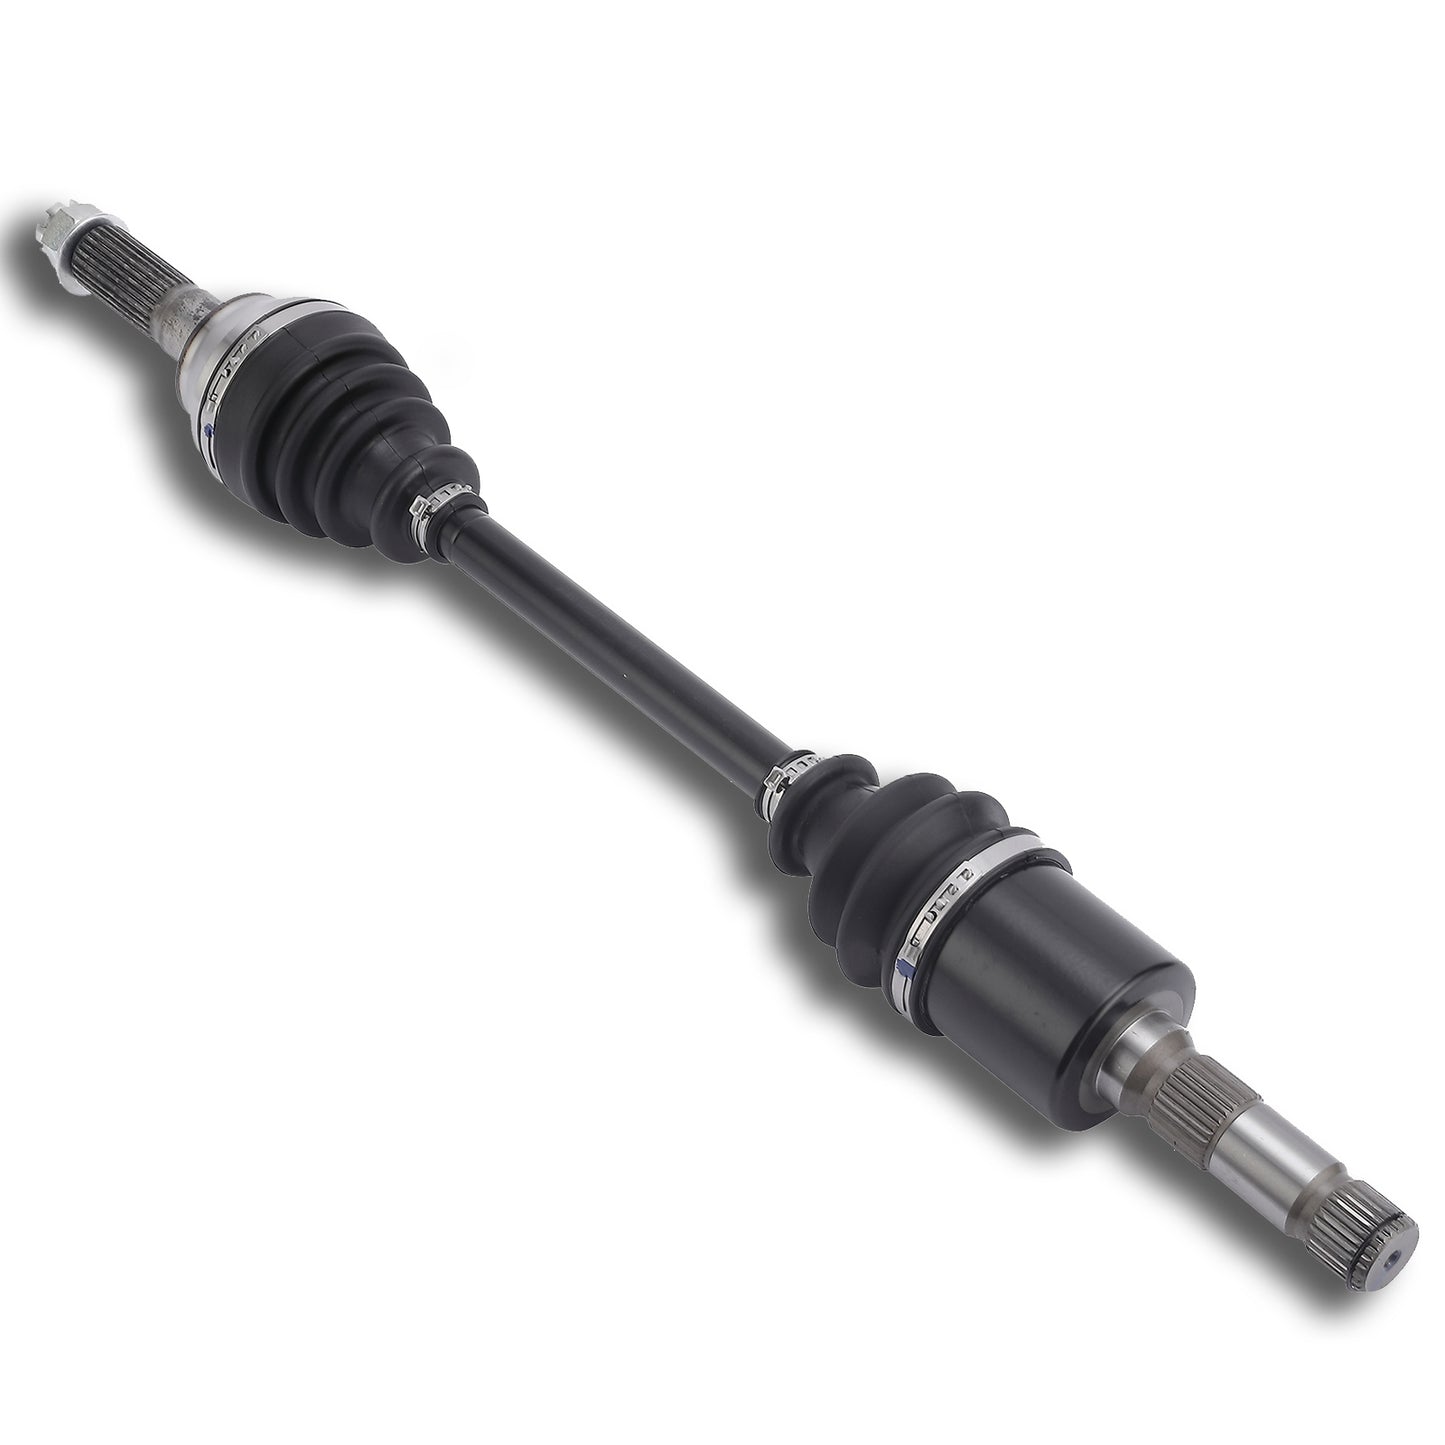 CAM-PO347 Rear Left Drive Shaft CV Axle Compatible with 2009-2007 RANGER 500 2x4 1332505